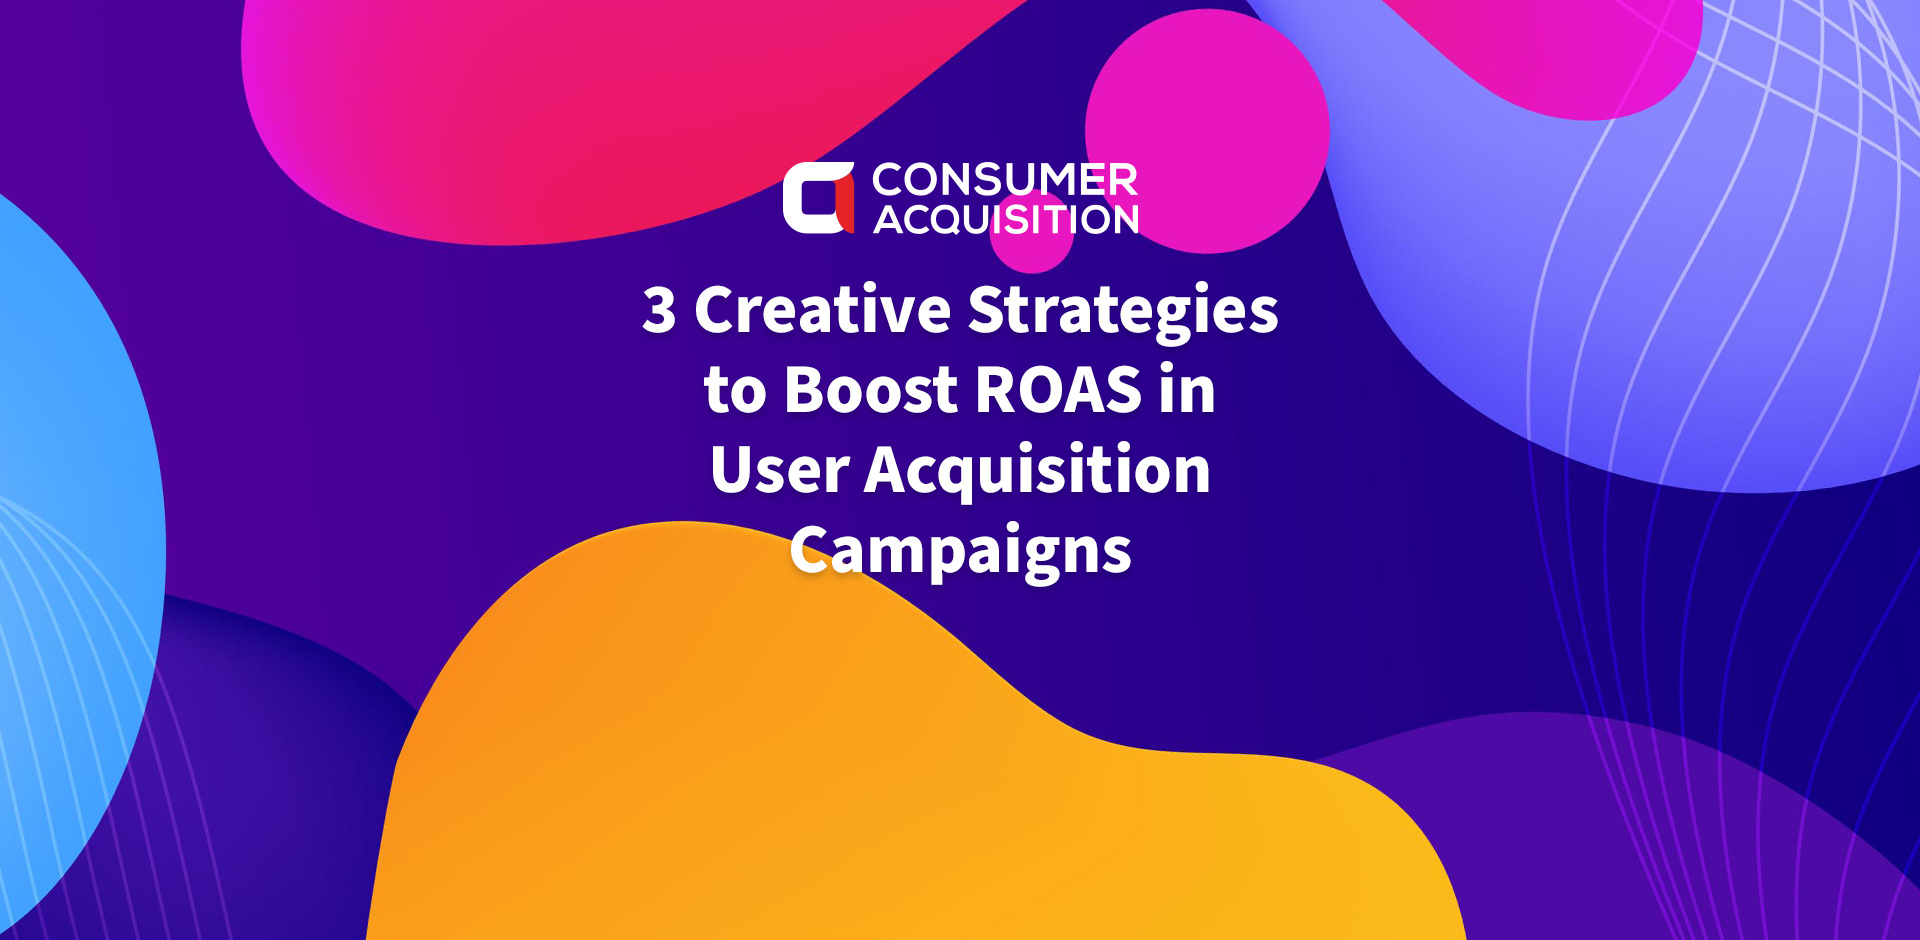 3 Creative Strategies to Boost ROAS in User Acquisition Campaigns